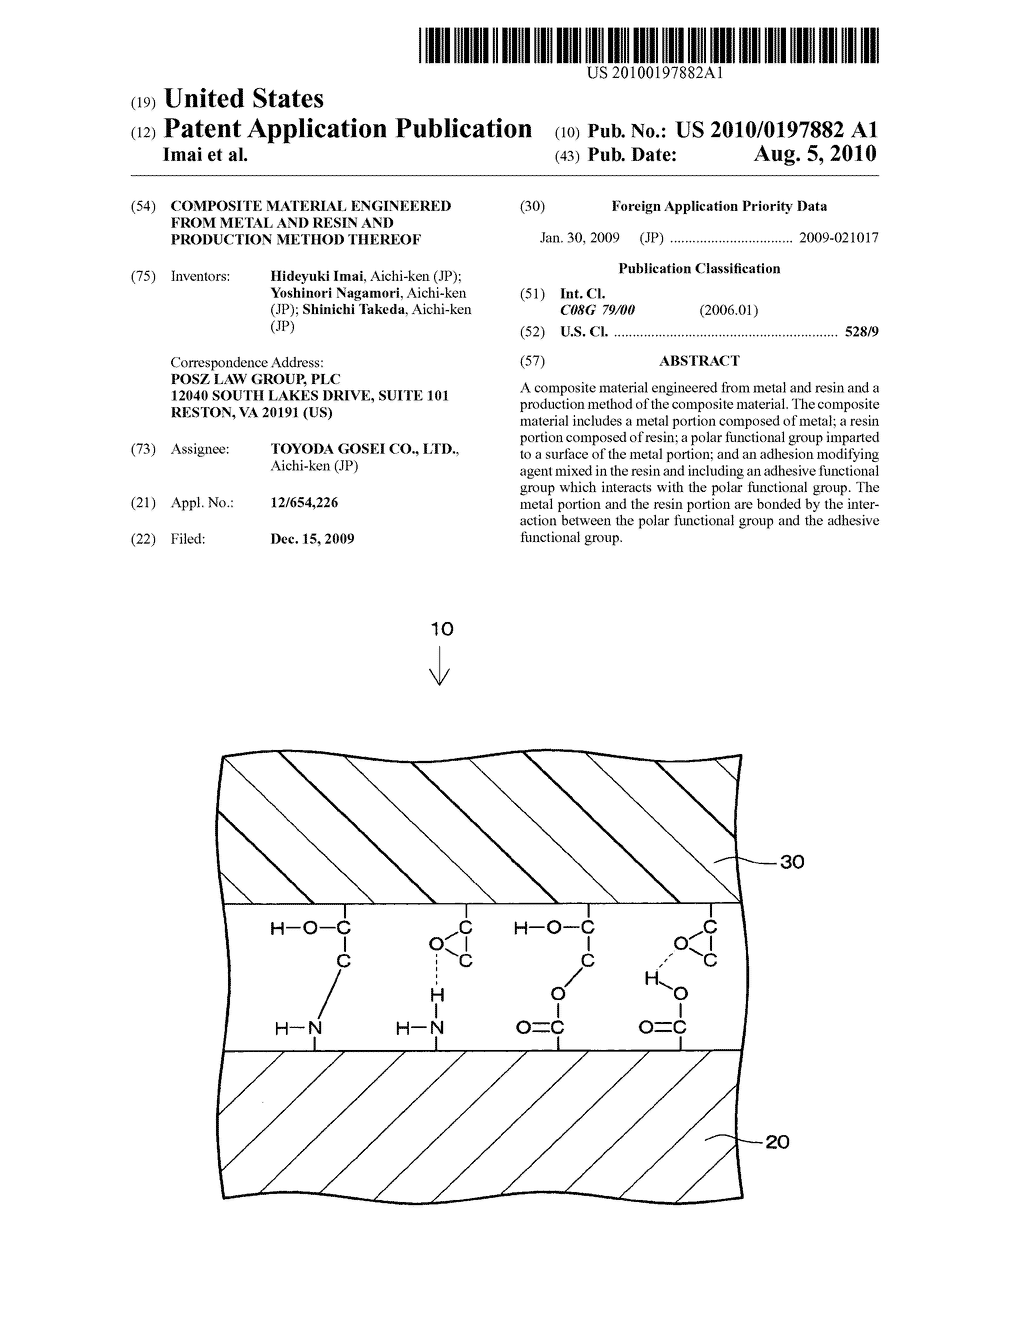 Composite material engineered from metal and resin and production method thereof - diagram, schematic, and image 01